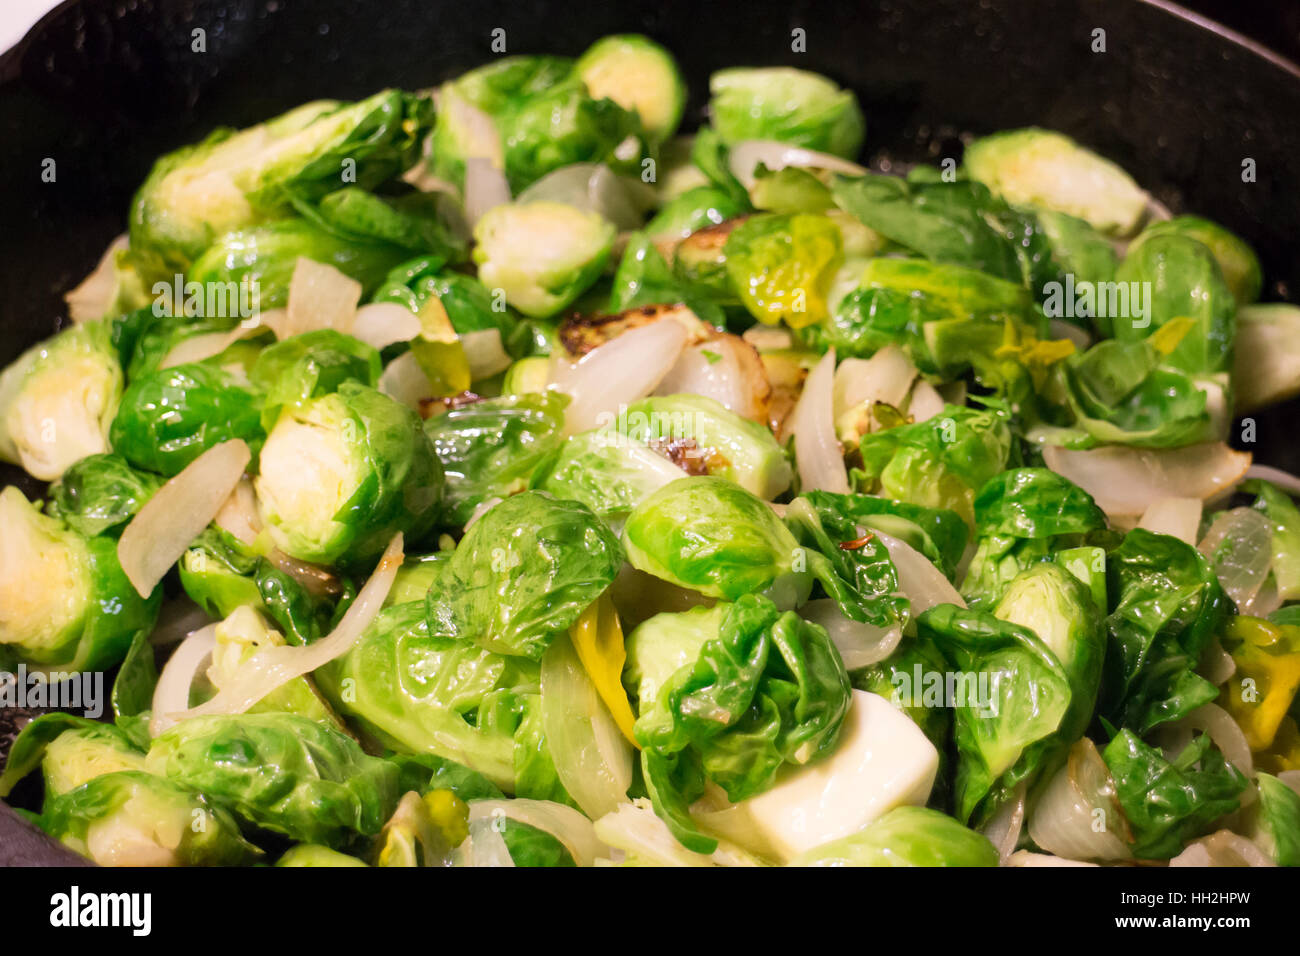 Brussel sprouts being cooked in a skillet with real butter in a home kitchen. Stock Photo